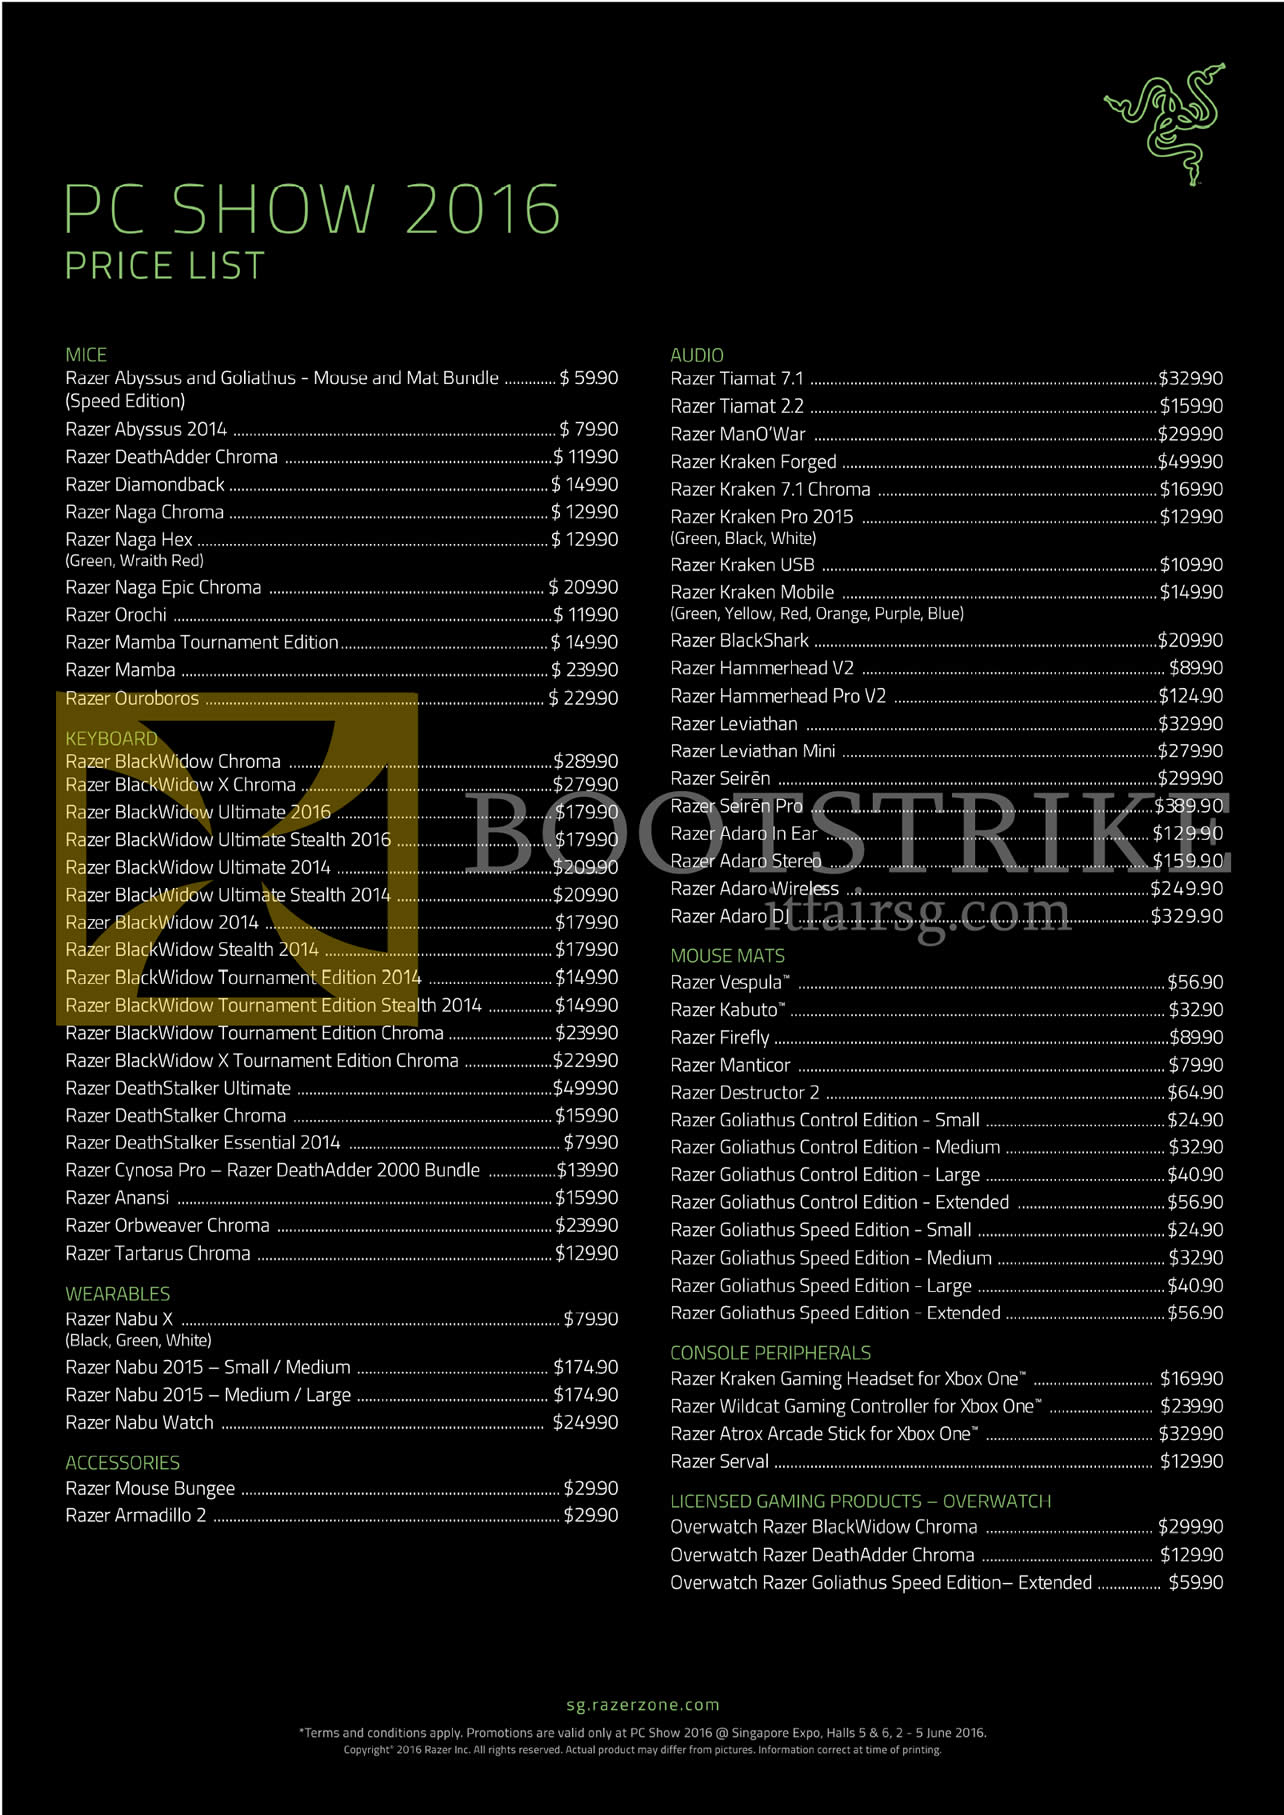 PC SHOW 2016 price list image brochure of Razer Mouse, Keyboards, Wearables, Accessories, Audio Systems, Headphones, Earphones, Mousemats, Console Peripherals, Gaming Products